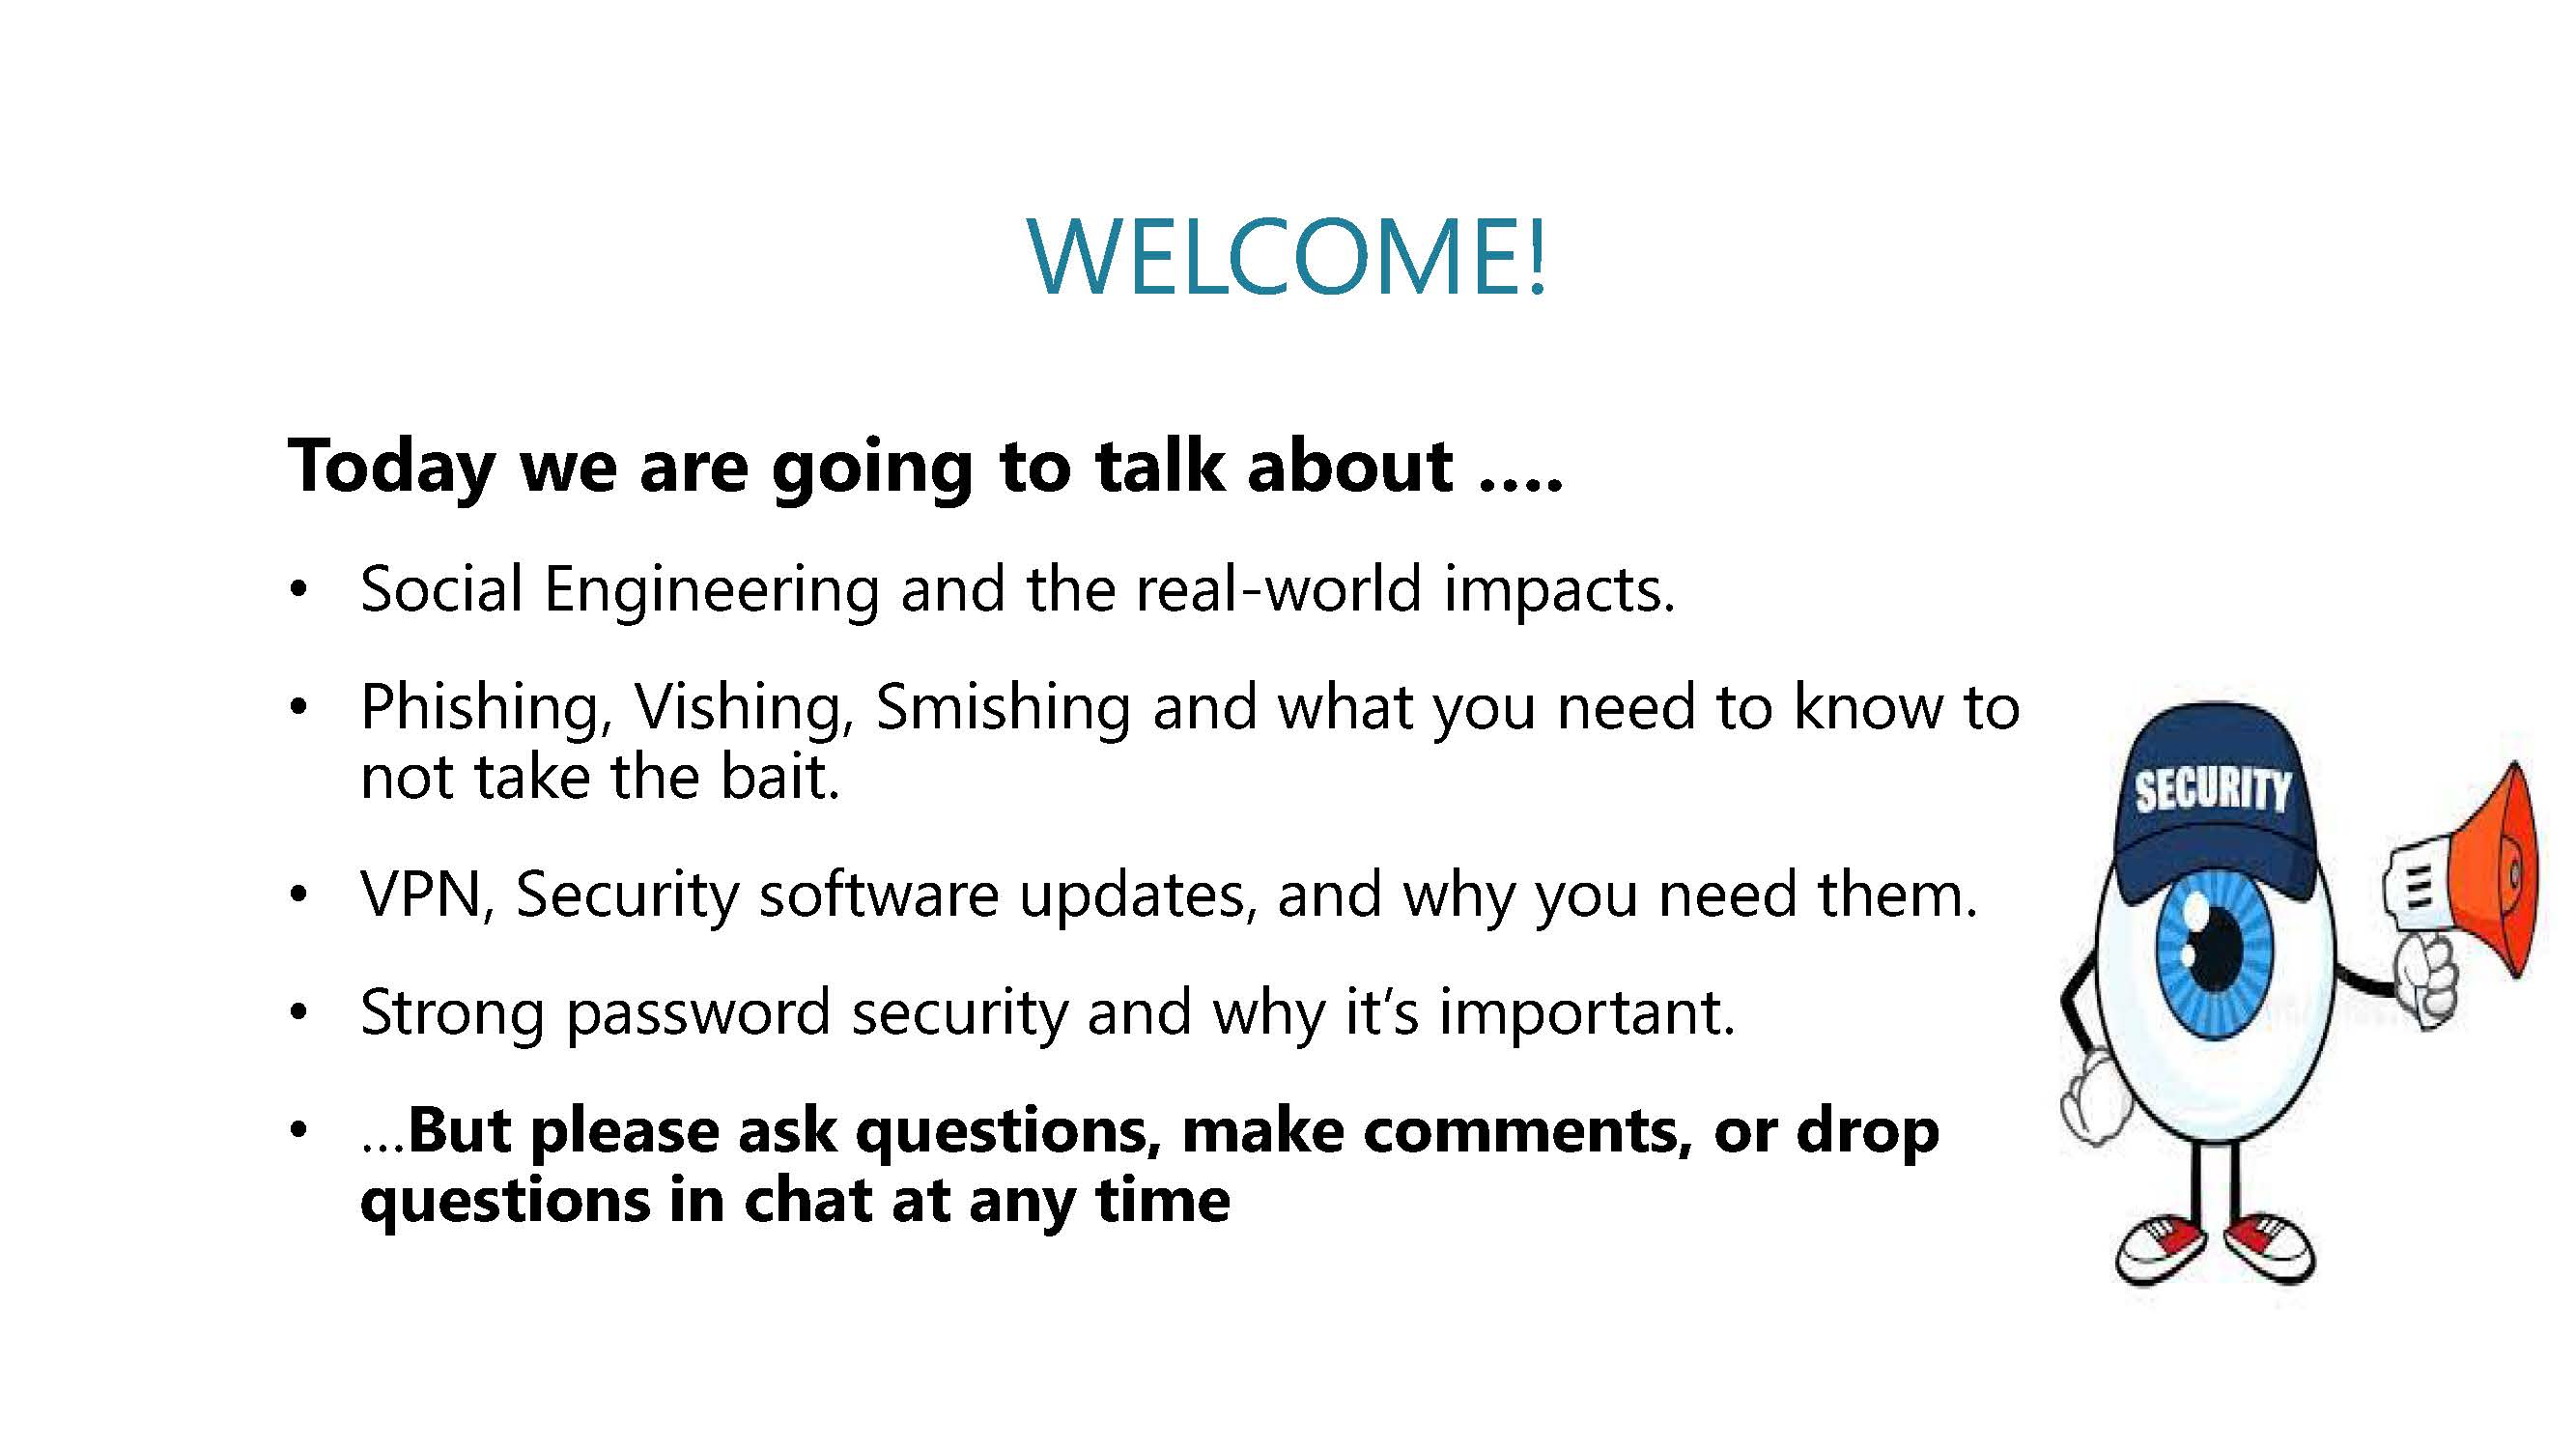 TechTalk_Security in the World today (002)_Page_05.jpg